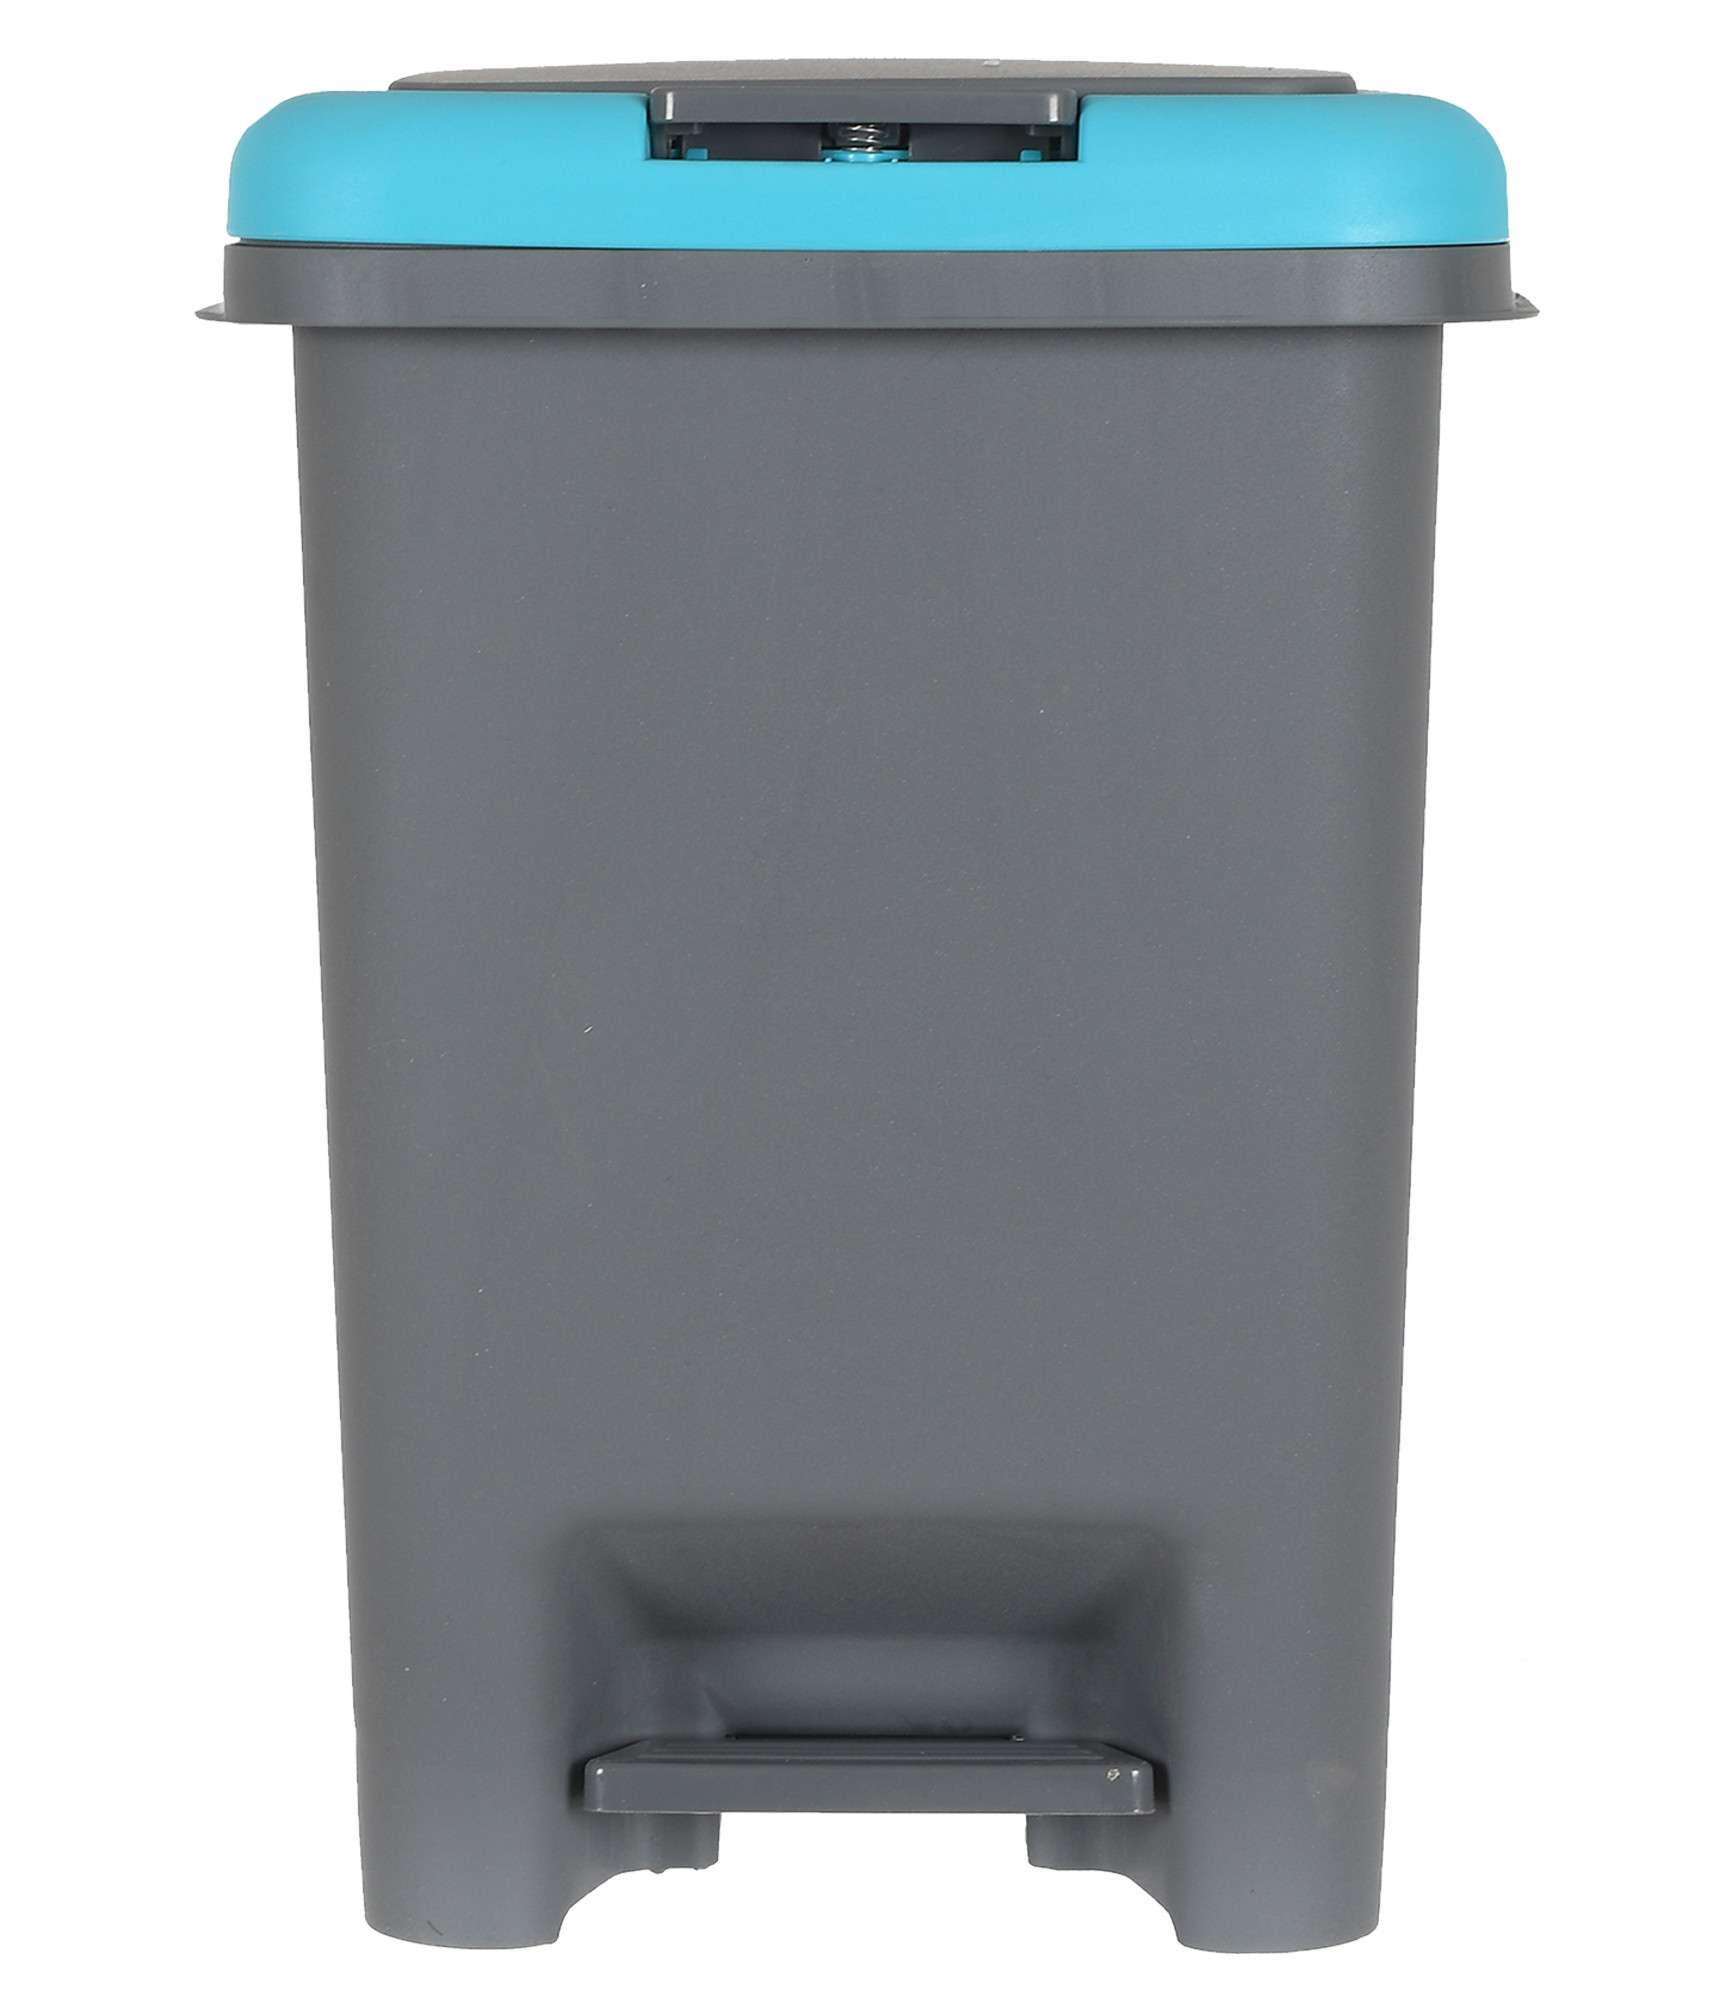 Kuber IndustriesPortable 6.5 Ltr Plastic Push And Pedal Dustbin With Lid Garbage Bins for Home Office (Grey & Blue)